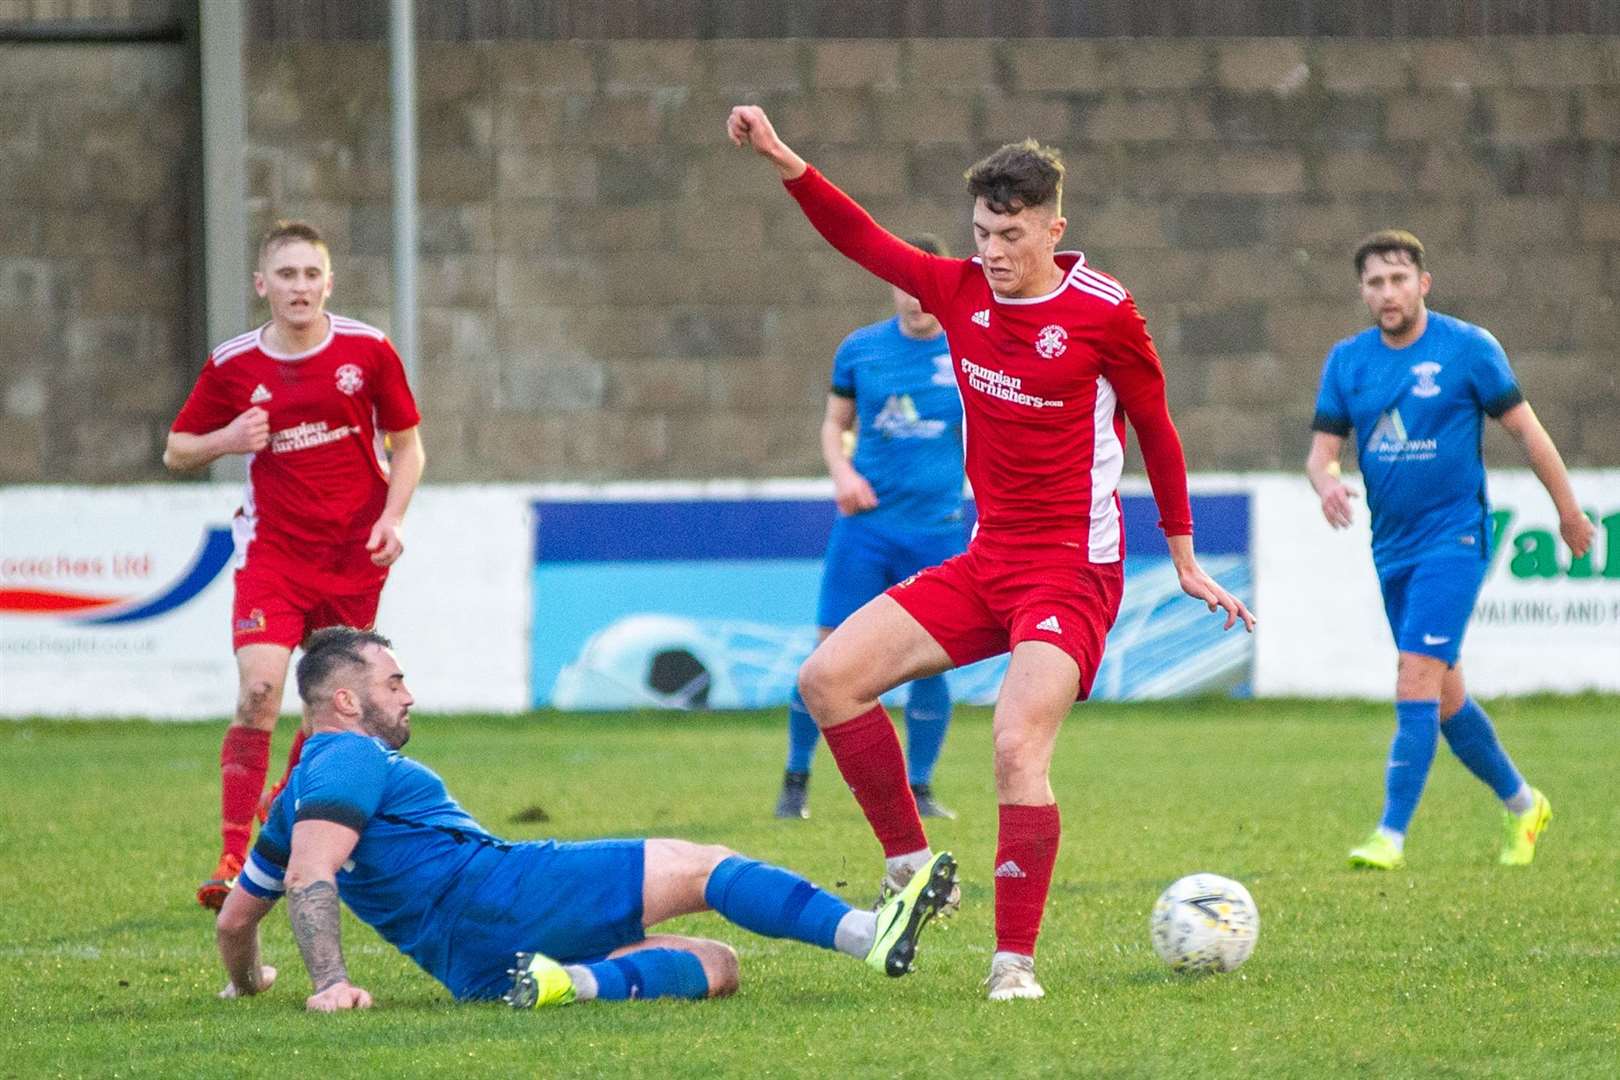 Strathspey Thistle captain James Fraser slides in to win the ball off Lossiemouth's Brodie Allen during a 2-0 win for the Jags away at Grant Park. The game in January, last year, turned out to be one of the last before the Covid pandemic struck. Picture: Daniel Forsyth